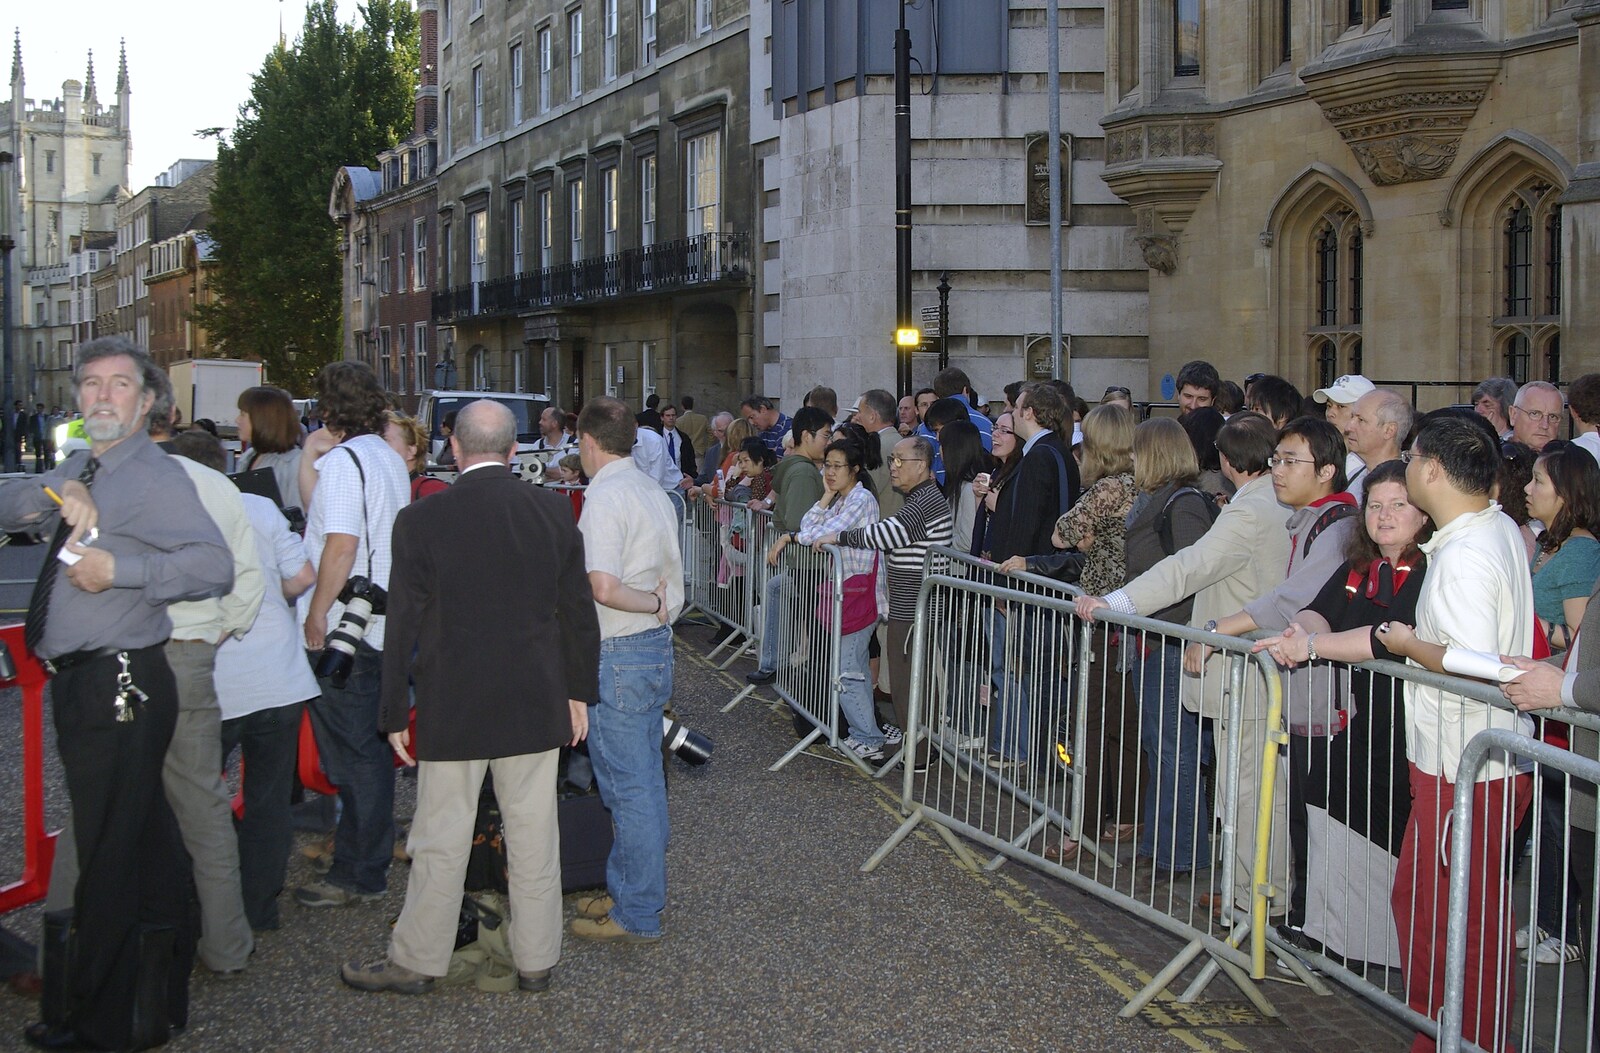 The crowds on King's Parade/Trumpington Street from A Brief Time in History: Stephen Hawking and the Corpus Christi Clock, Benet Street, Cambridge - 19th September 2008